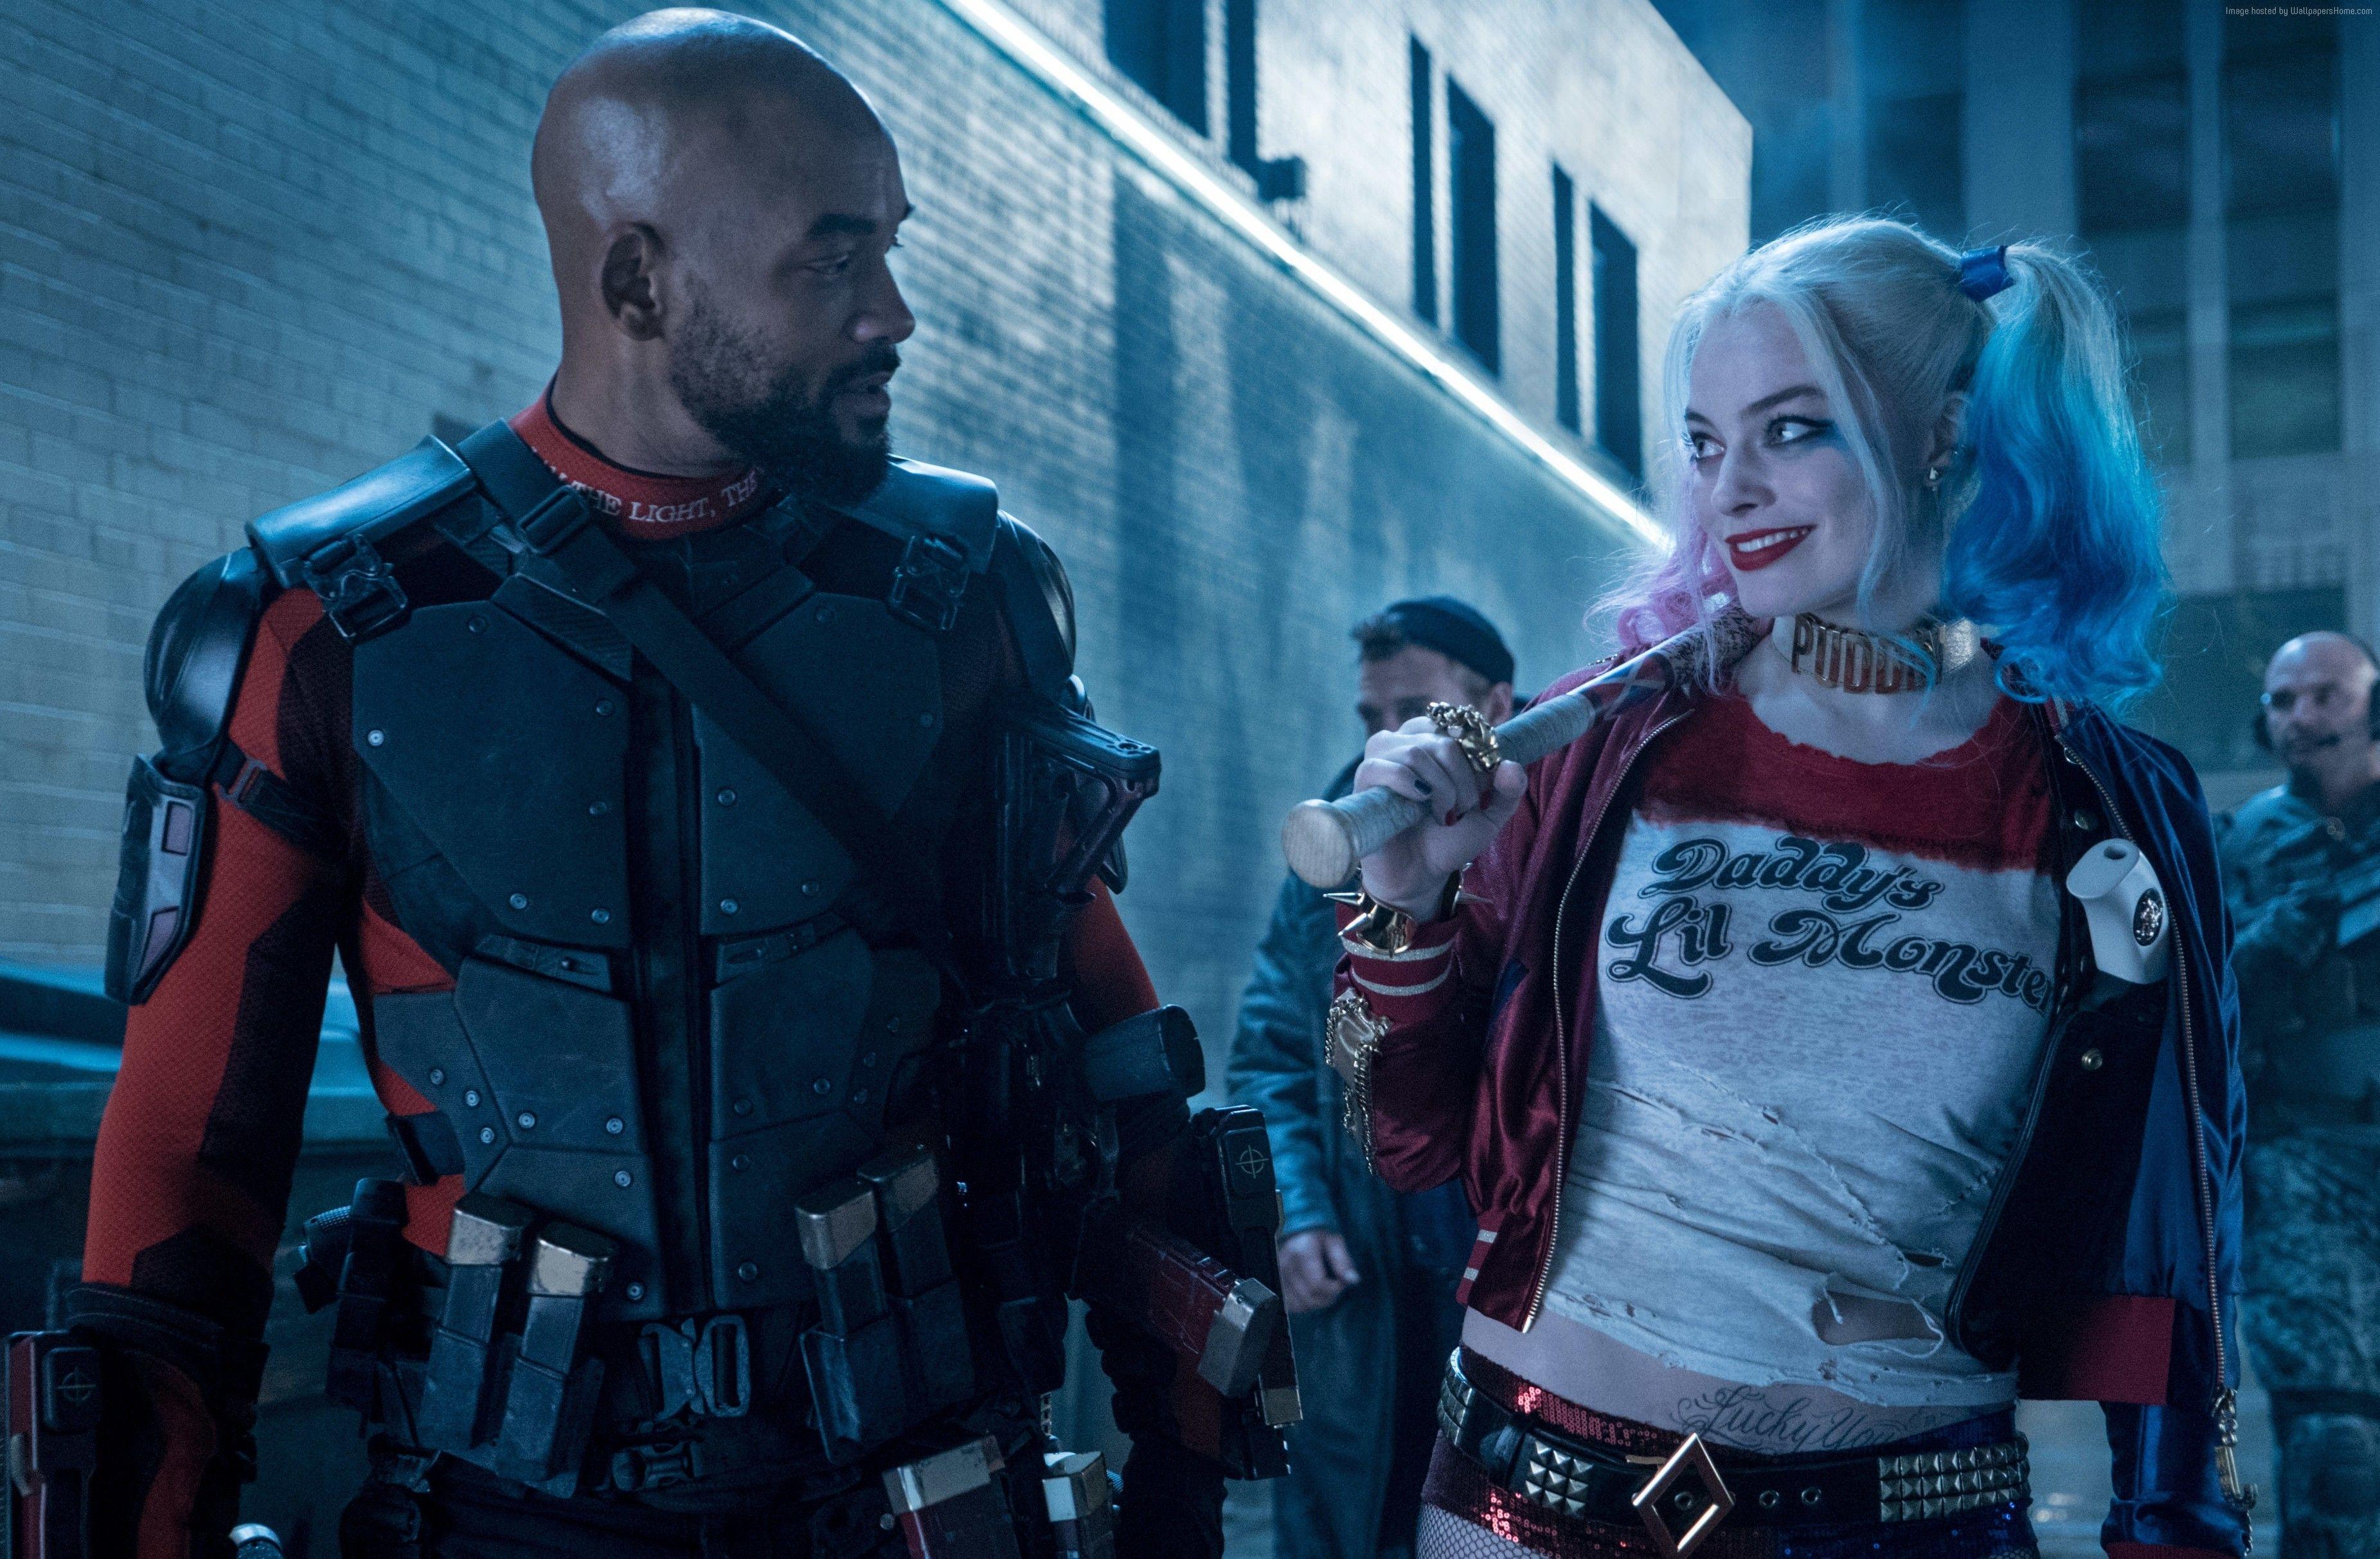 Suicide Squad Wallpaper, Movies: Suicide Squad, Harley Quinn